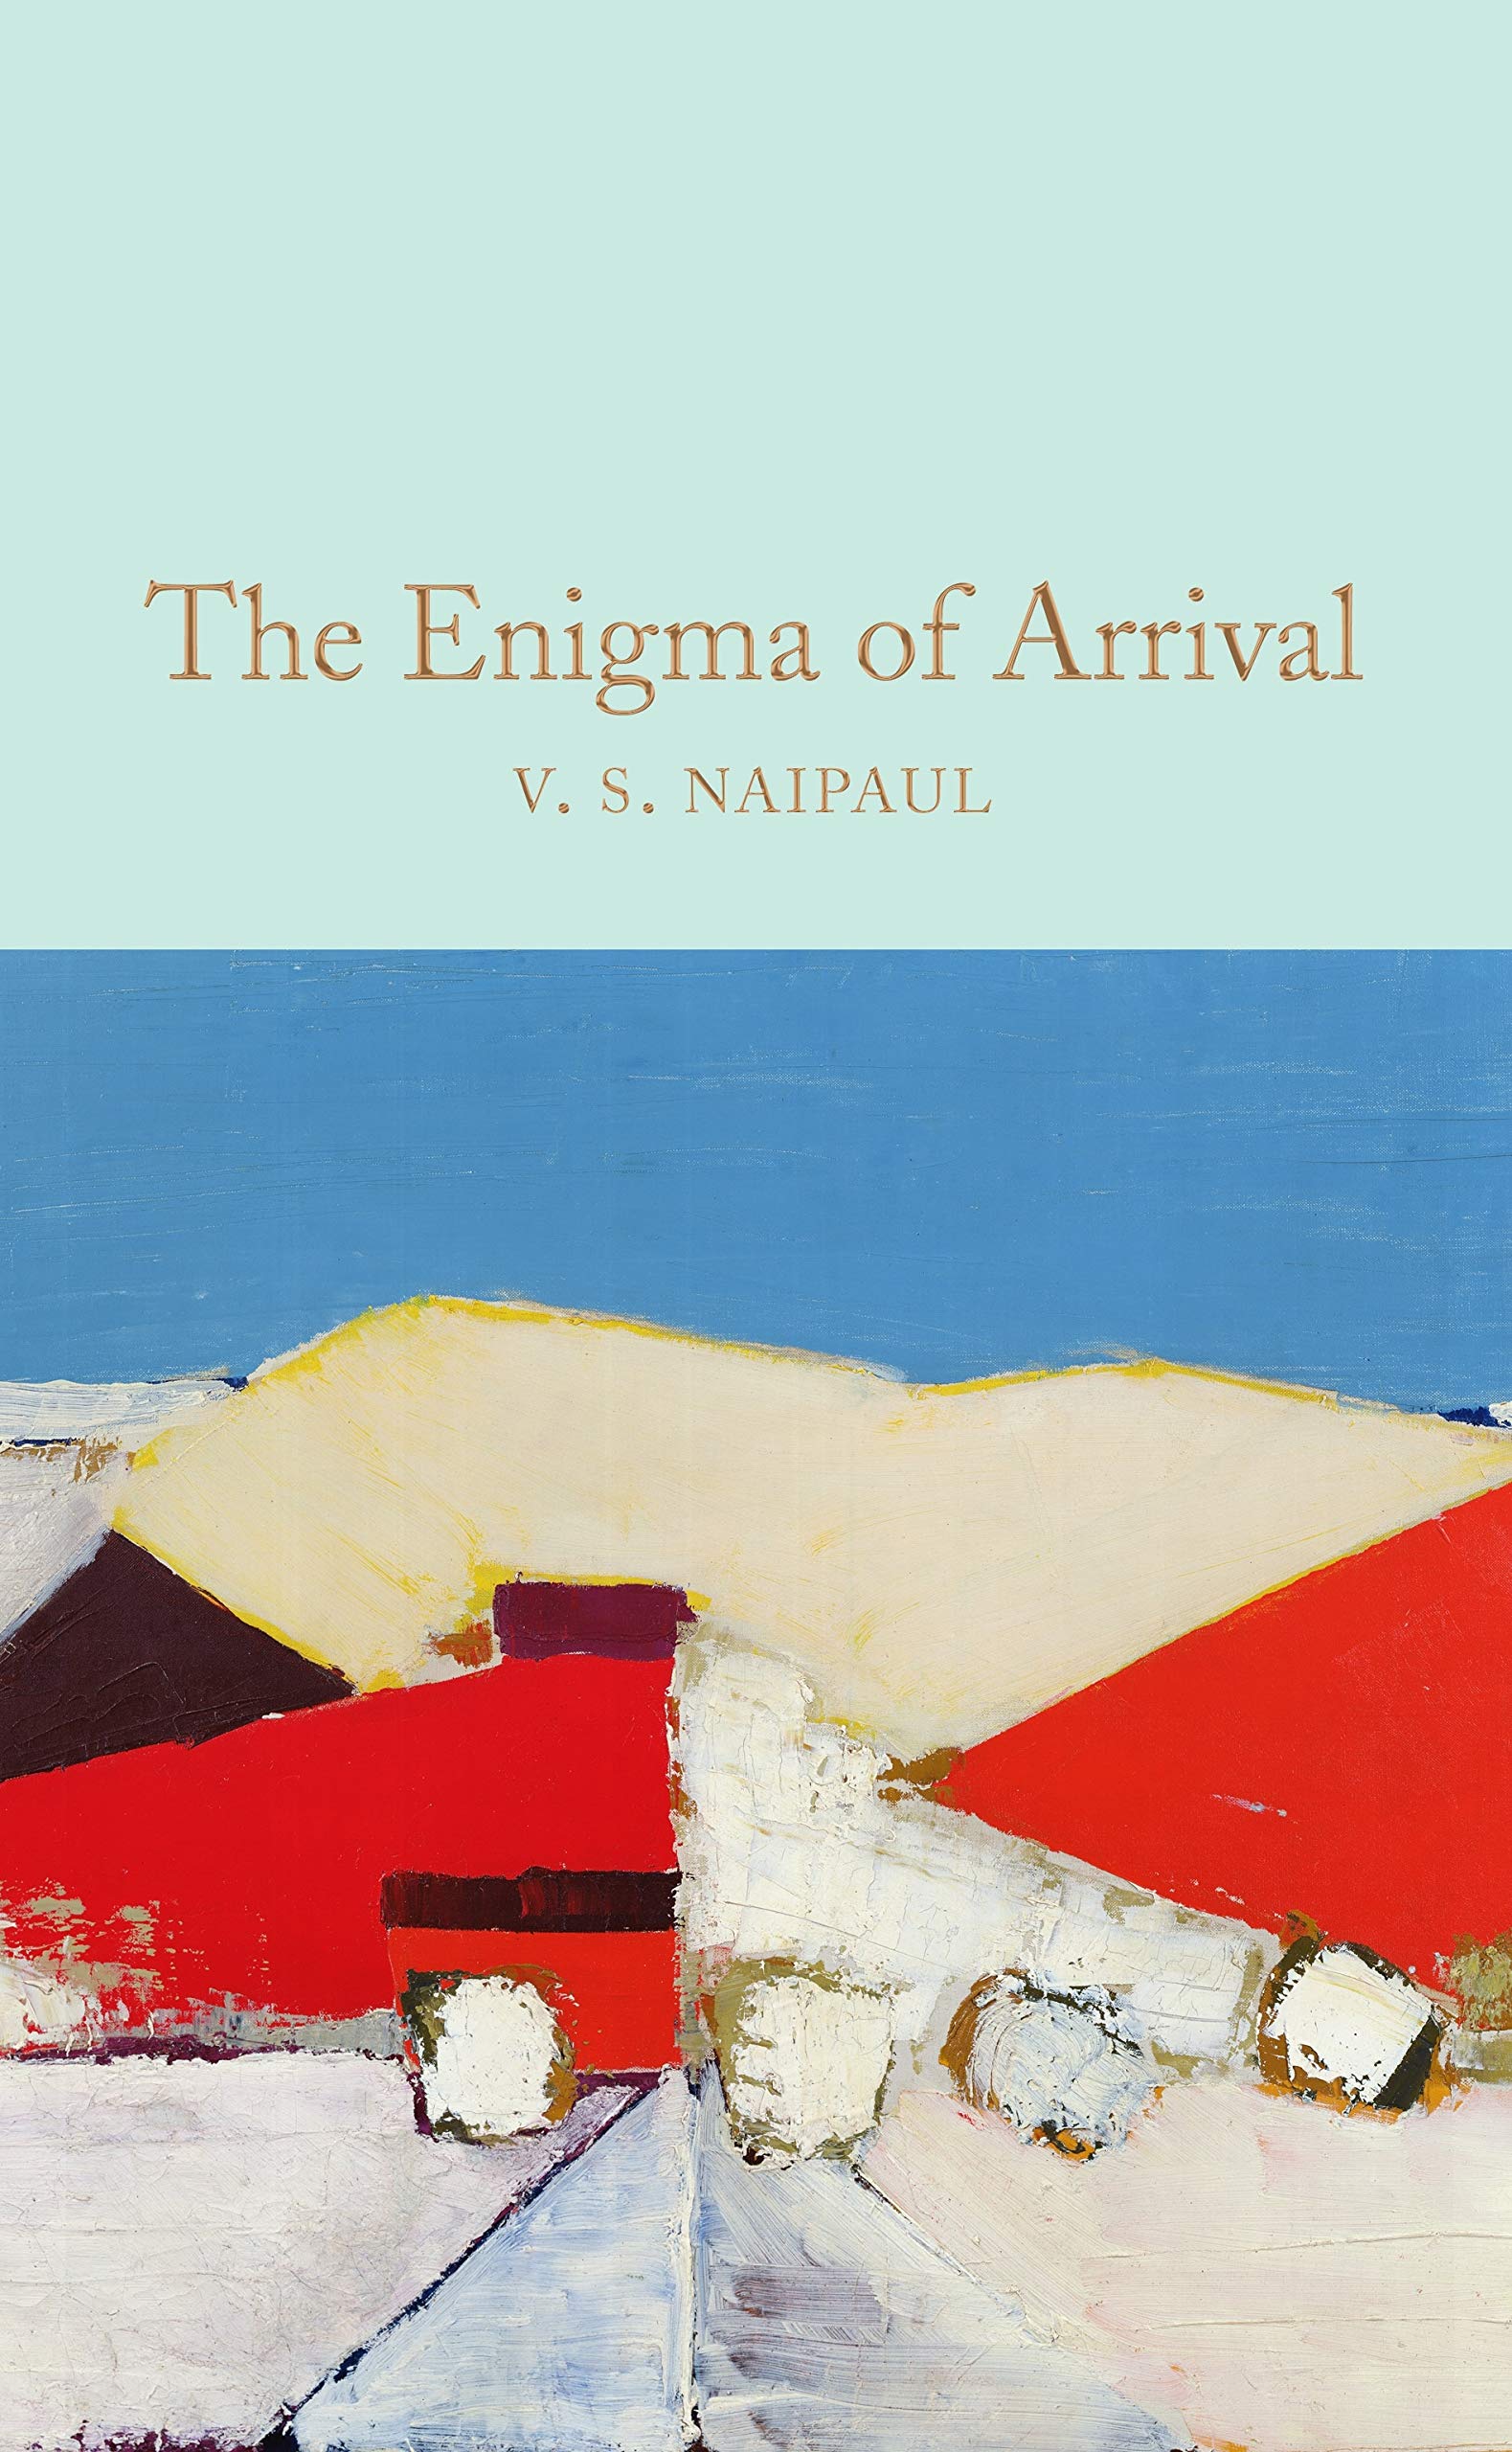 The Enigma of Arrival | V. S. Naipaul image